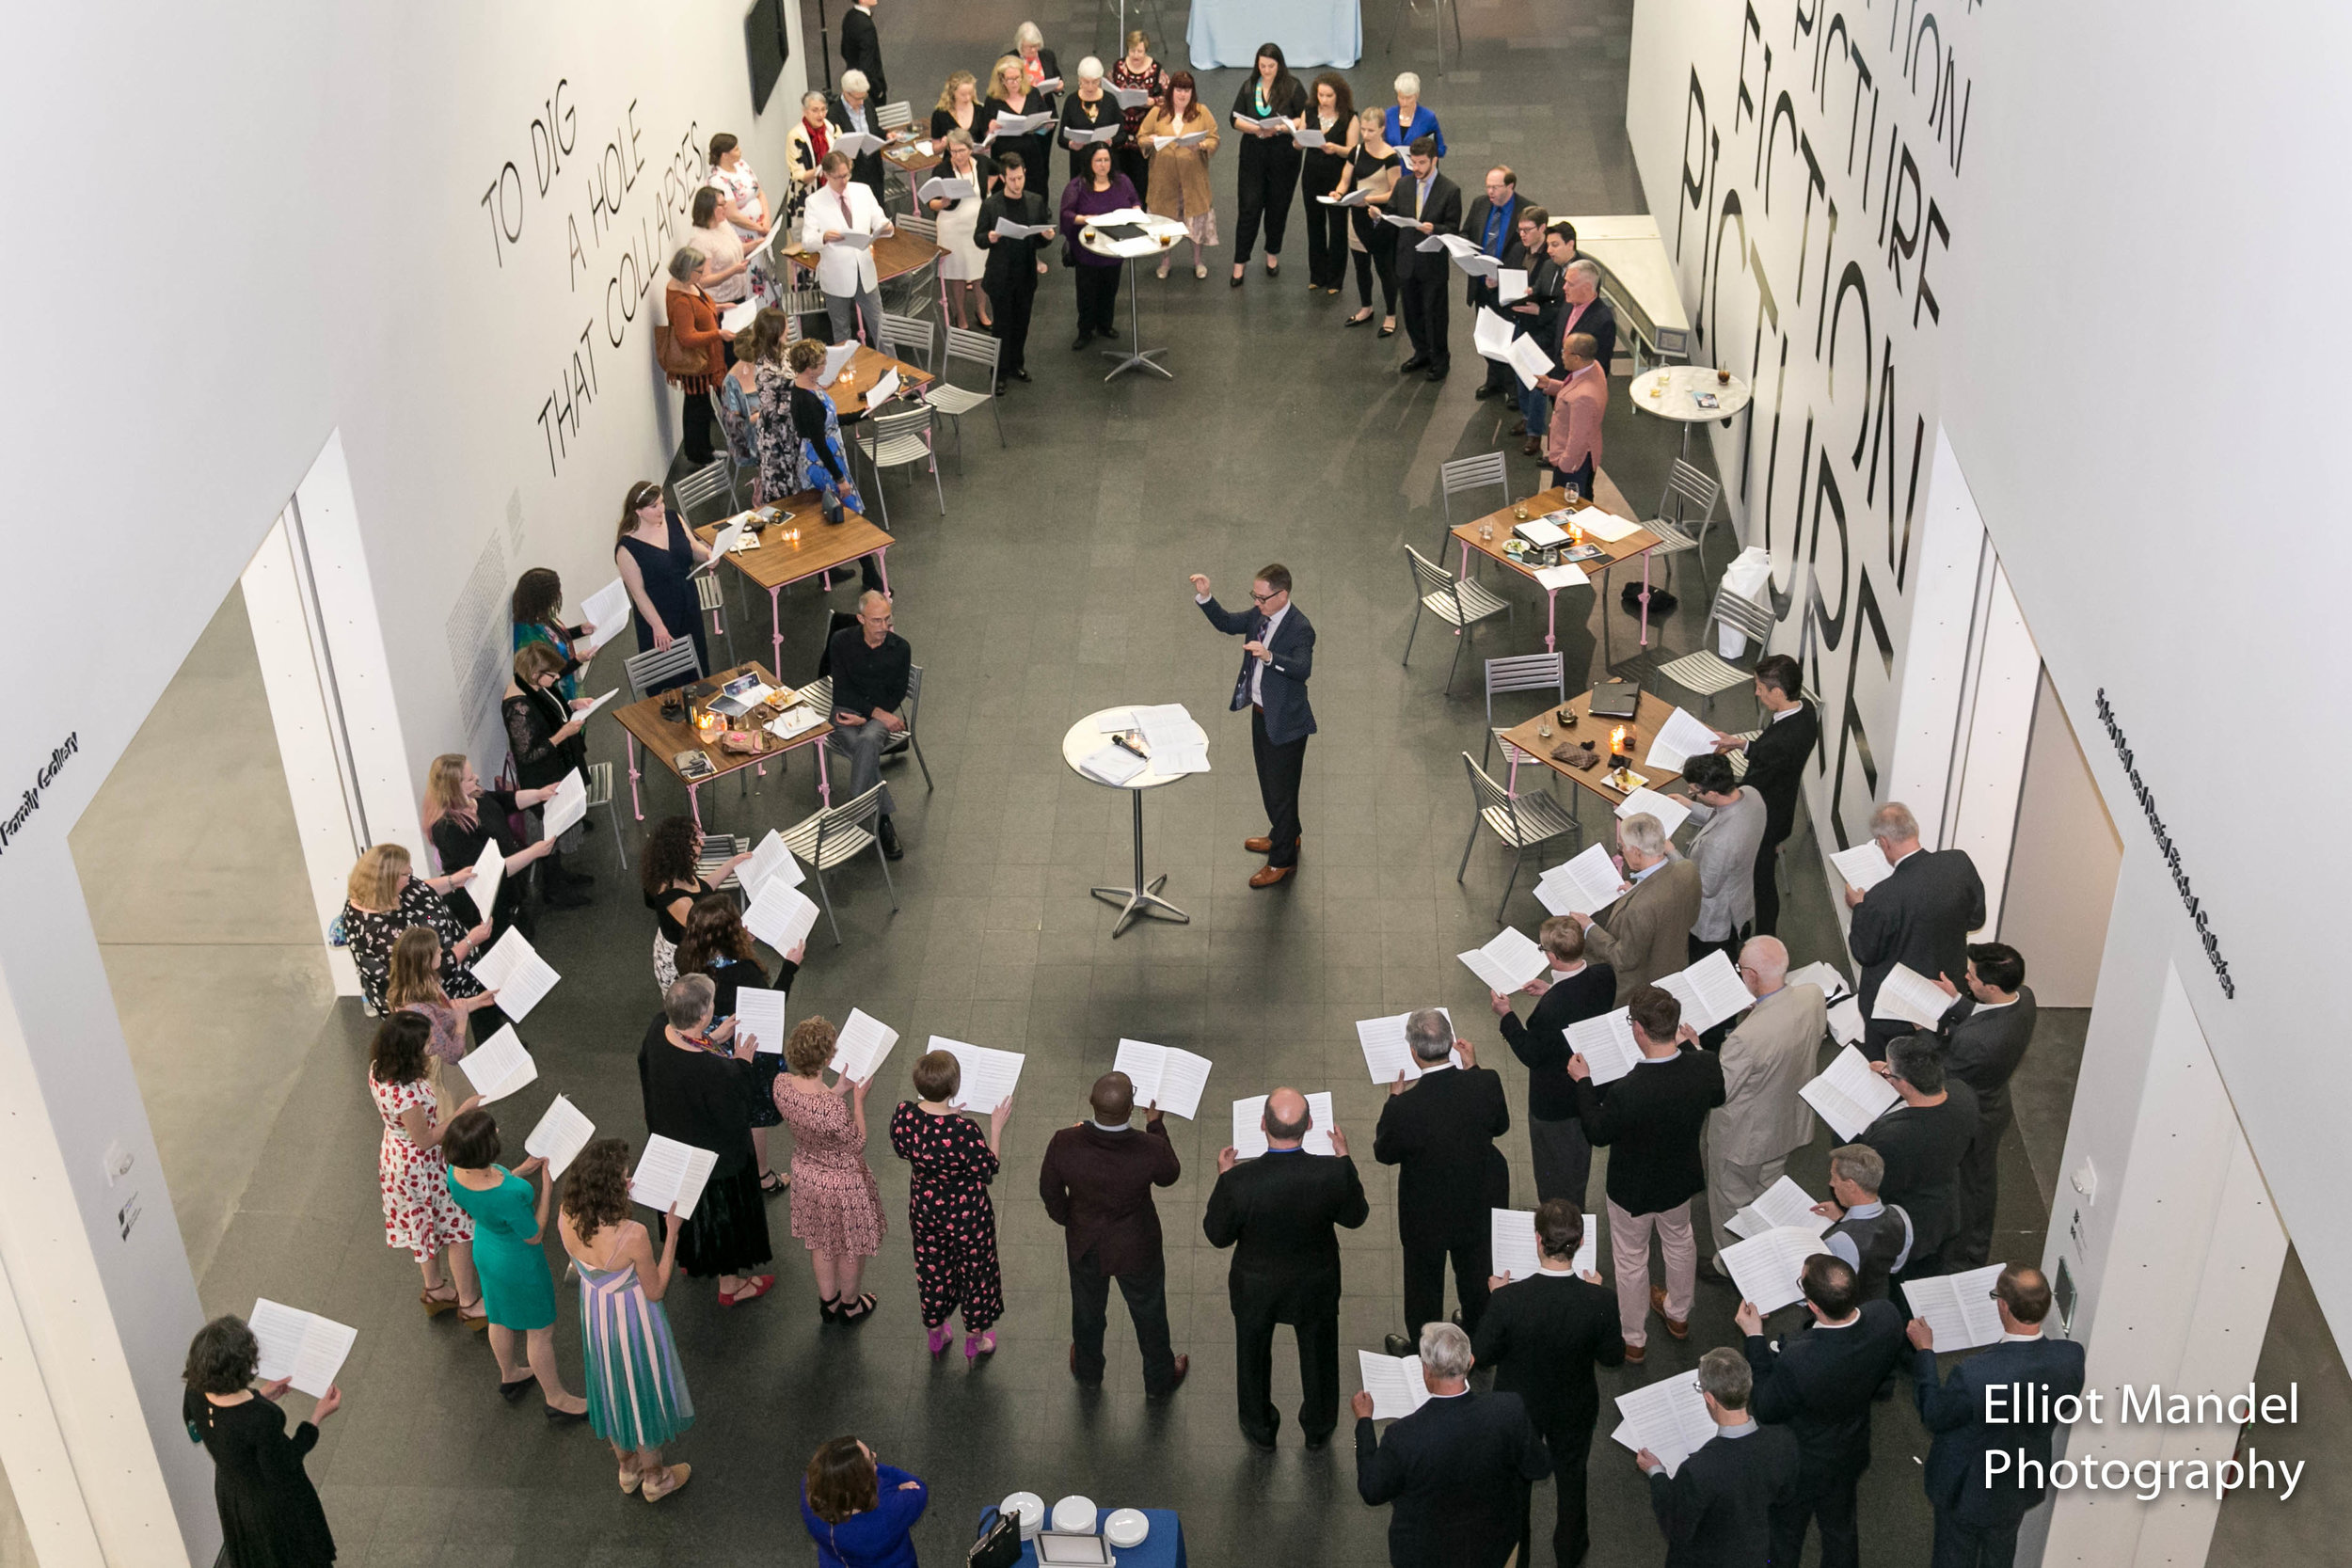  Bella Voce stand and sing as one during their annual gala at the Museum of Contemporary Art (May 19, 2018). 